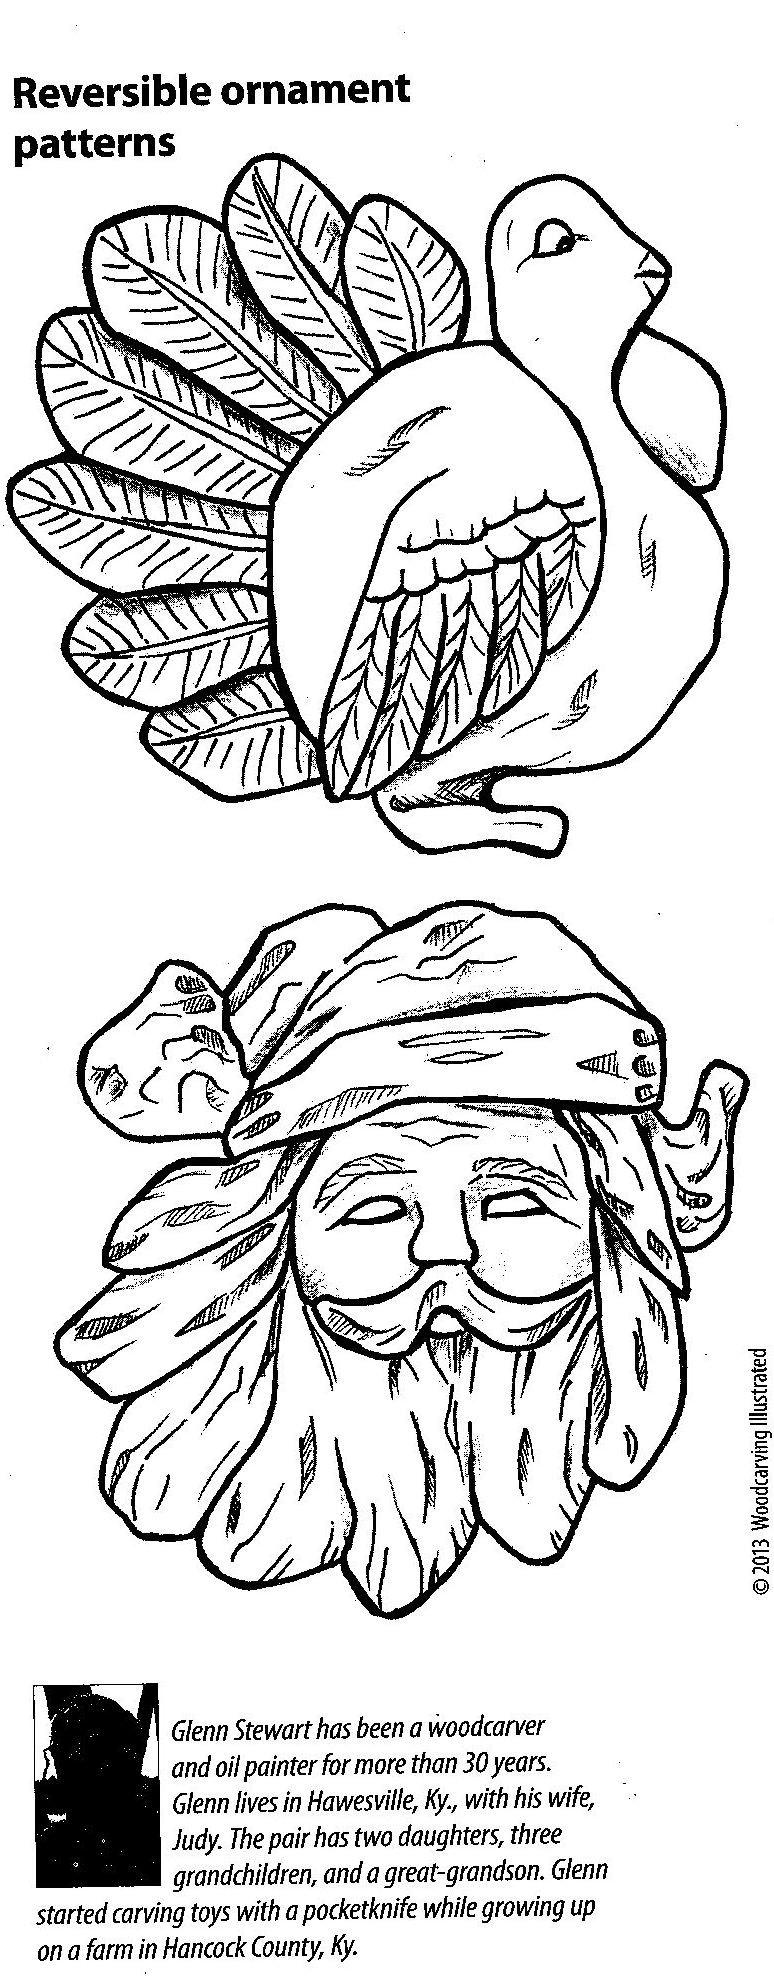 Several of you are working on angels, Santas and snowman. Here is another idea from Woodcarving Illustrated, courtesy of Denis Miller.